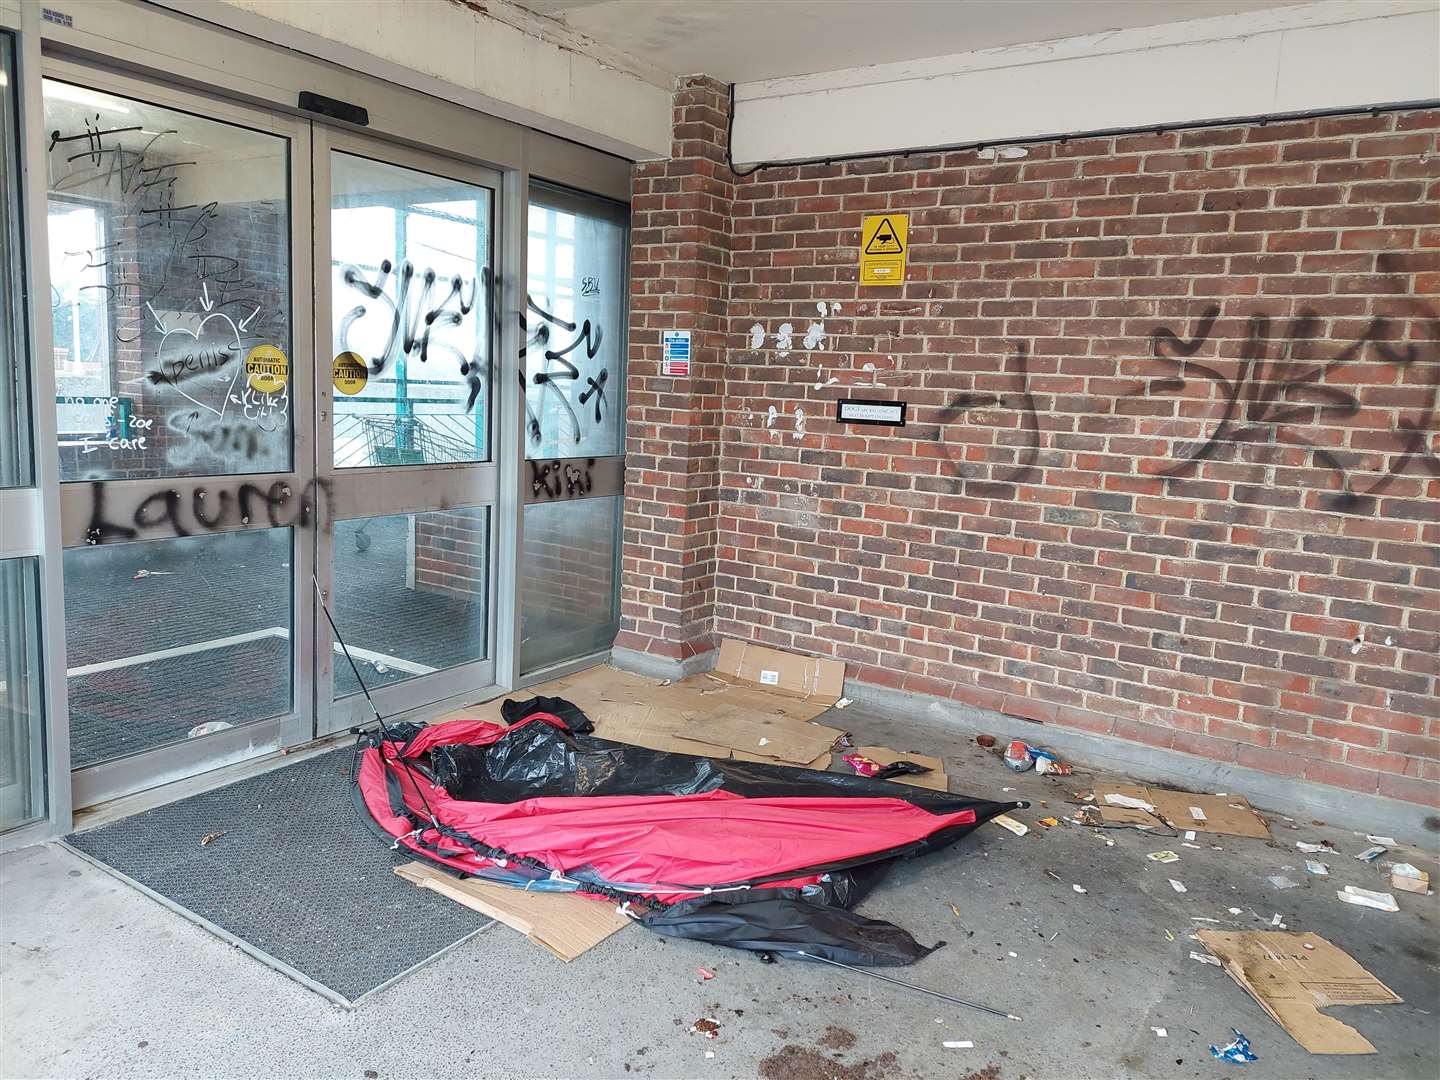 Vandals have graffitied the walls and it appears someone was sleeping in a tent at the town centre car park